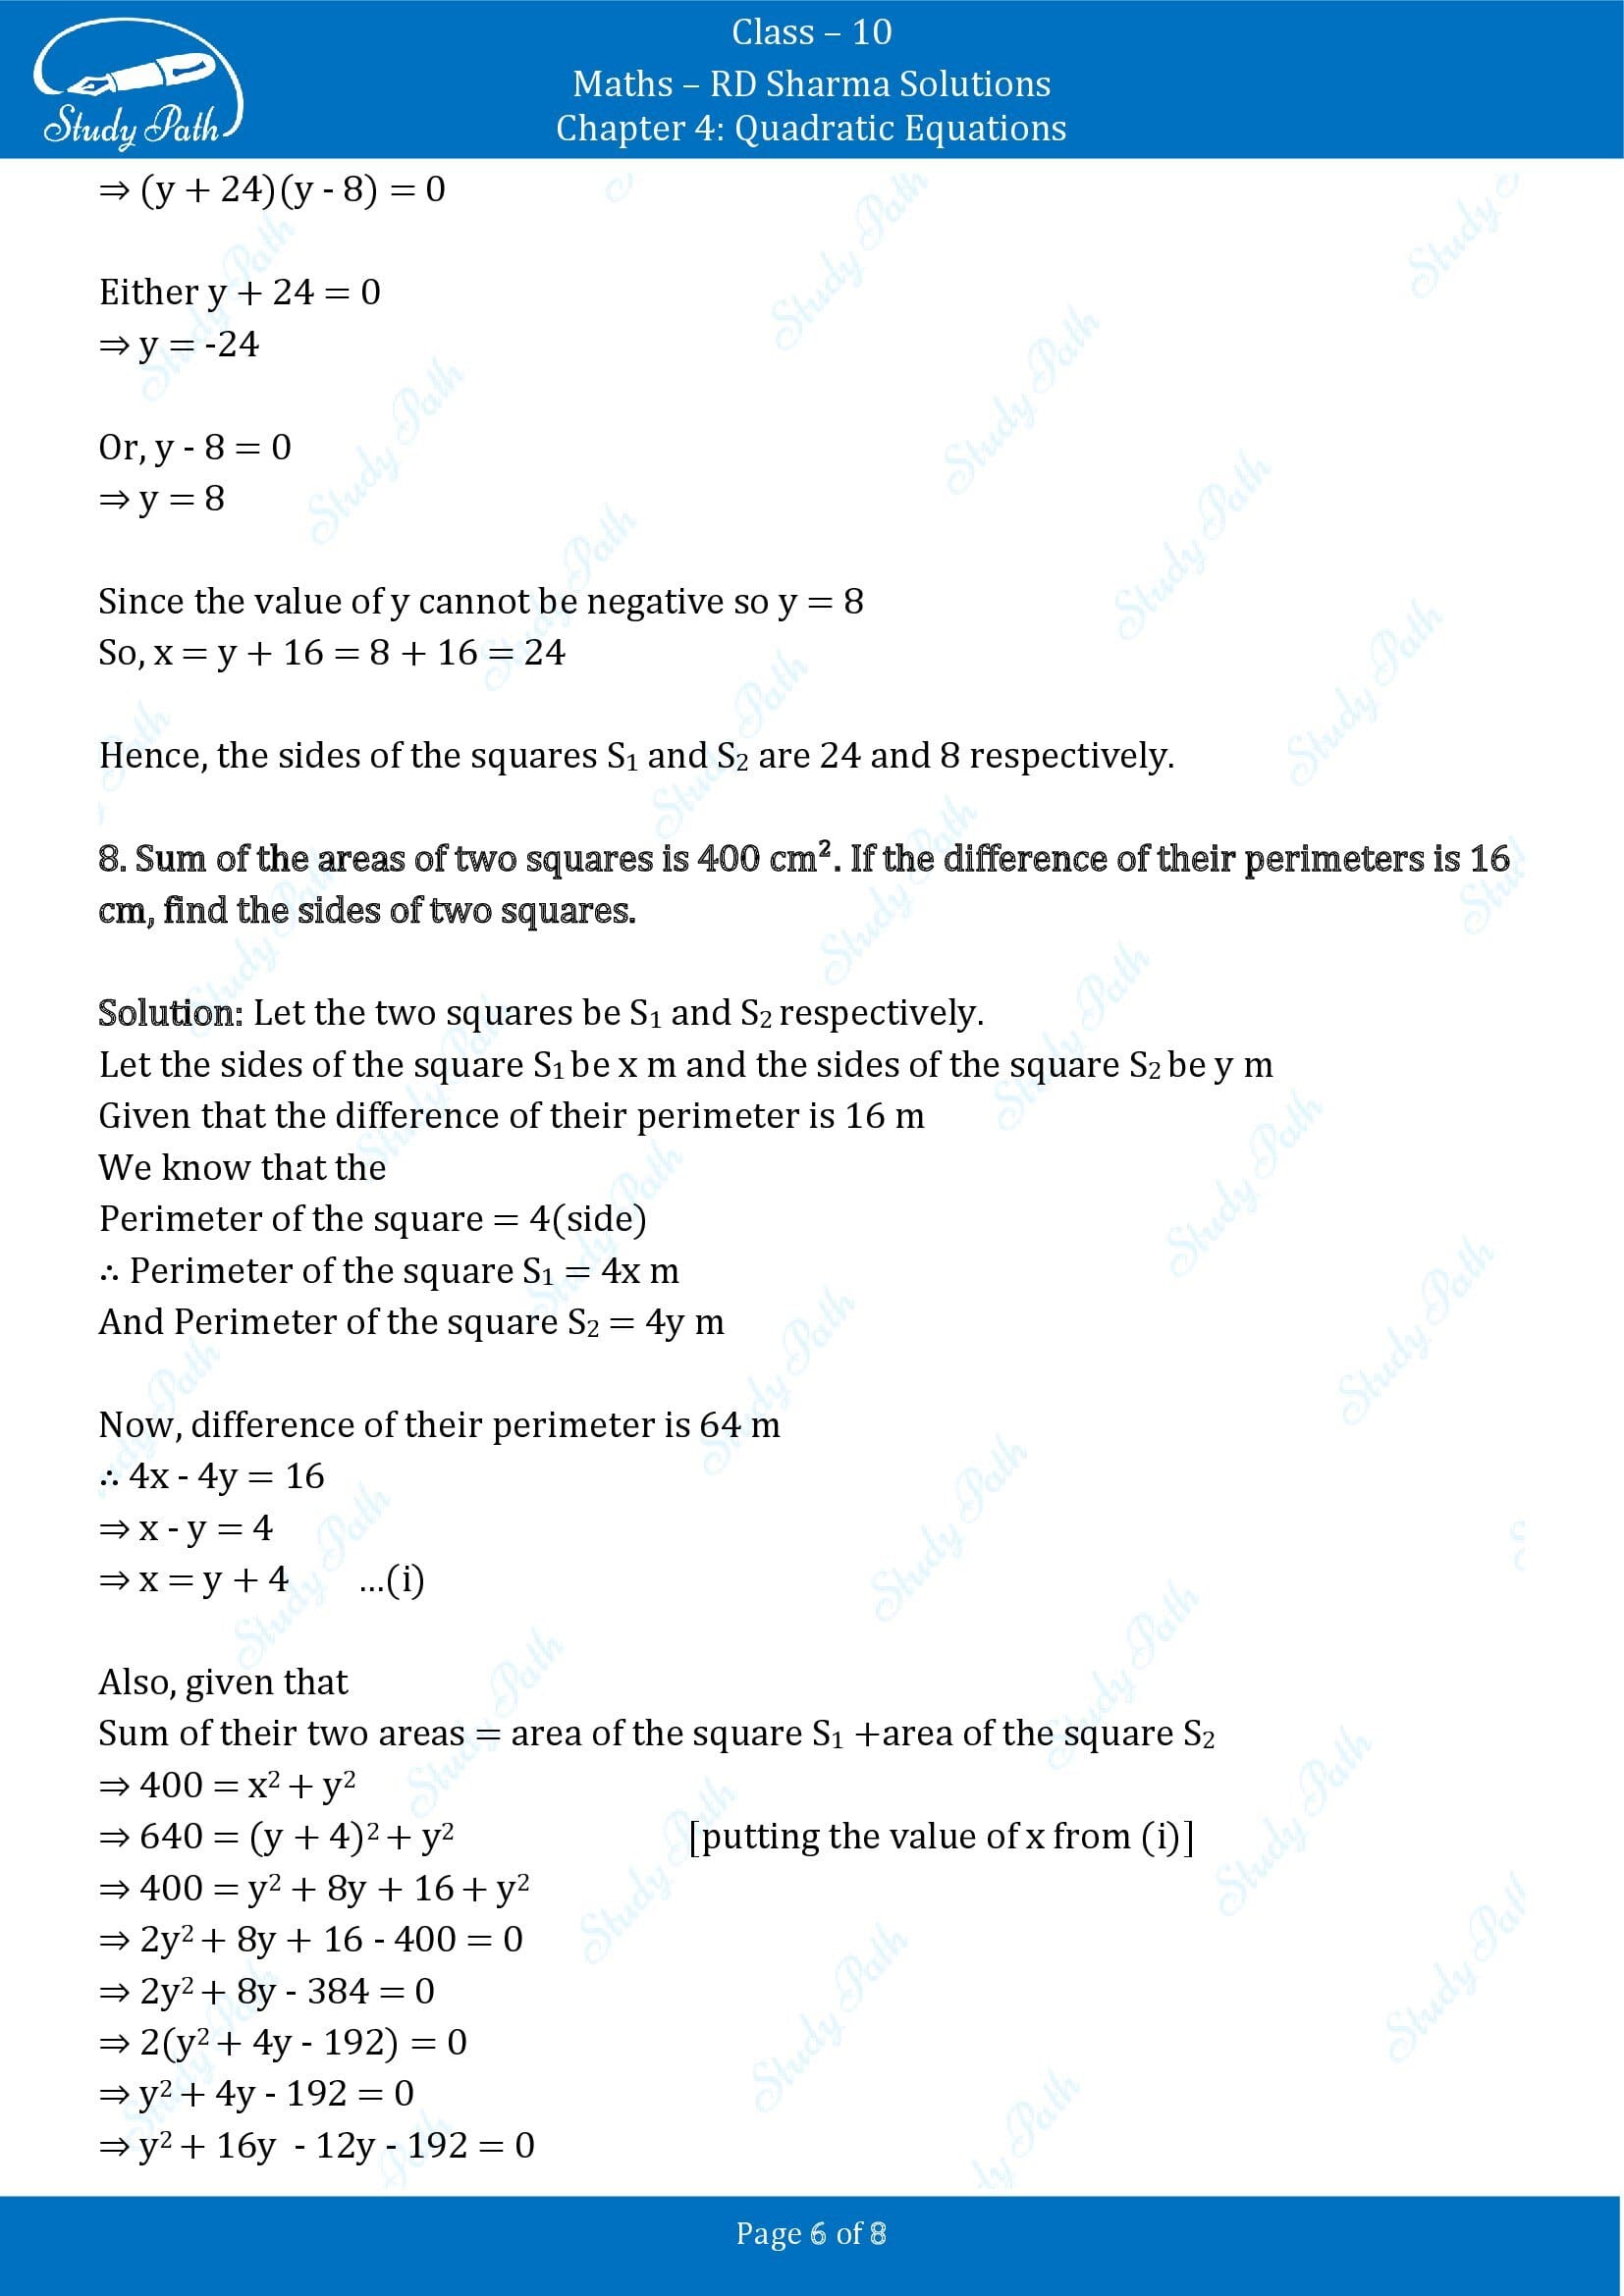 RD Sharma Solutions Class 10 Chapter 4 Quadratic Equations Exercise 4.11 00006